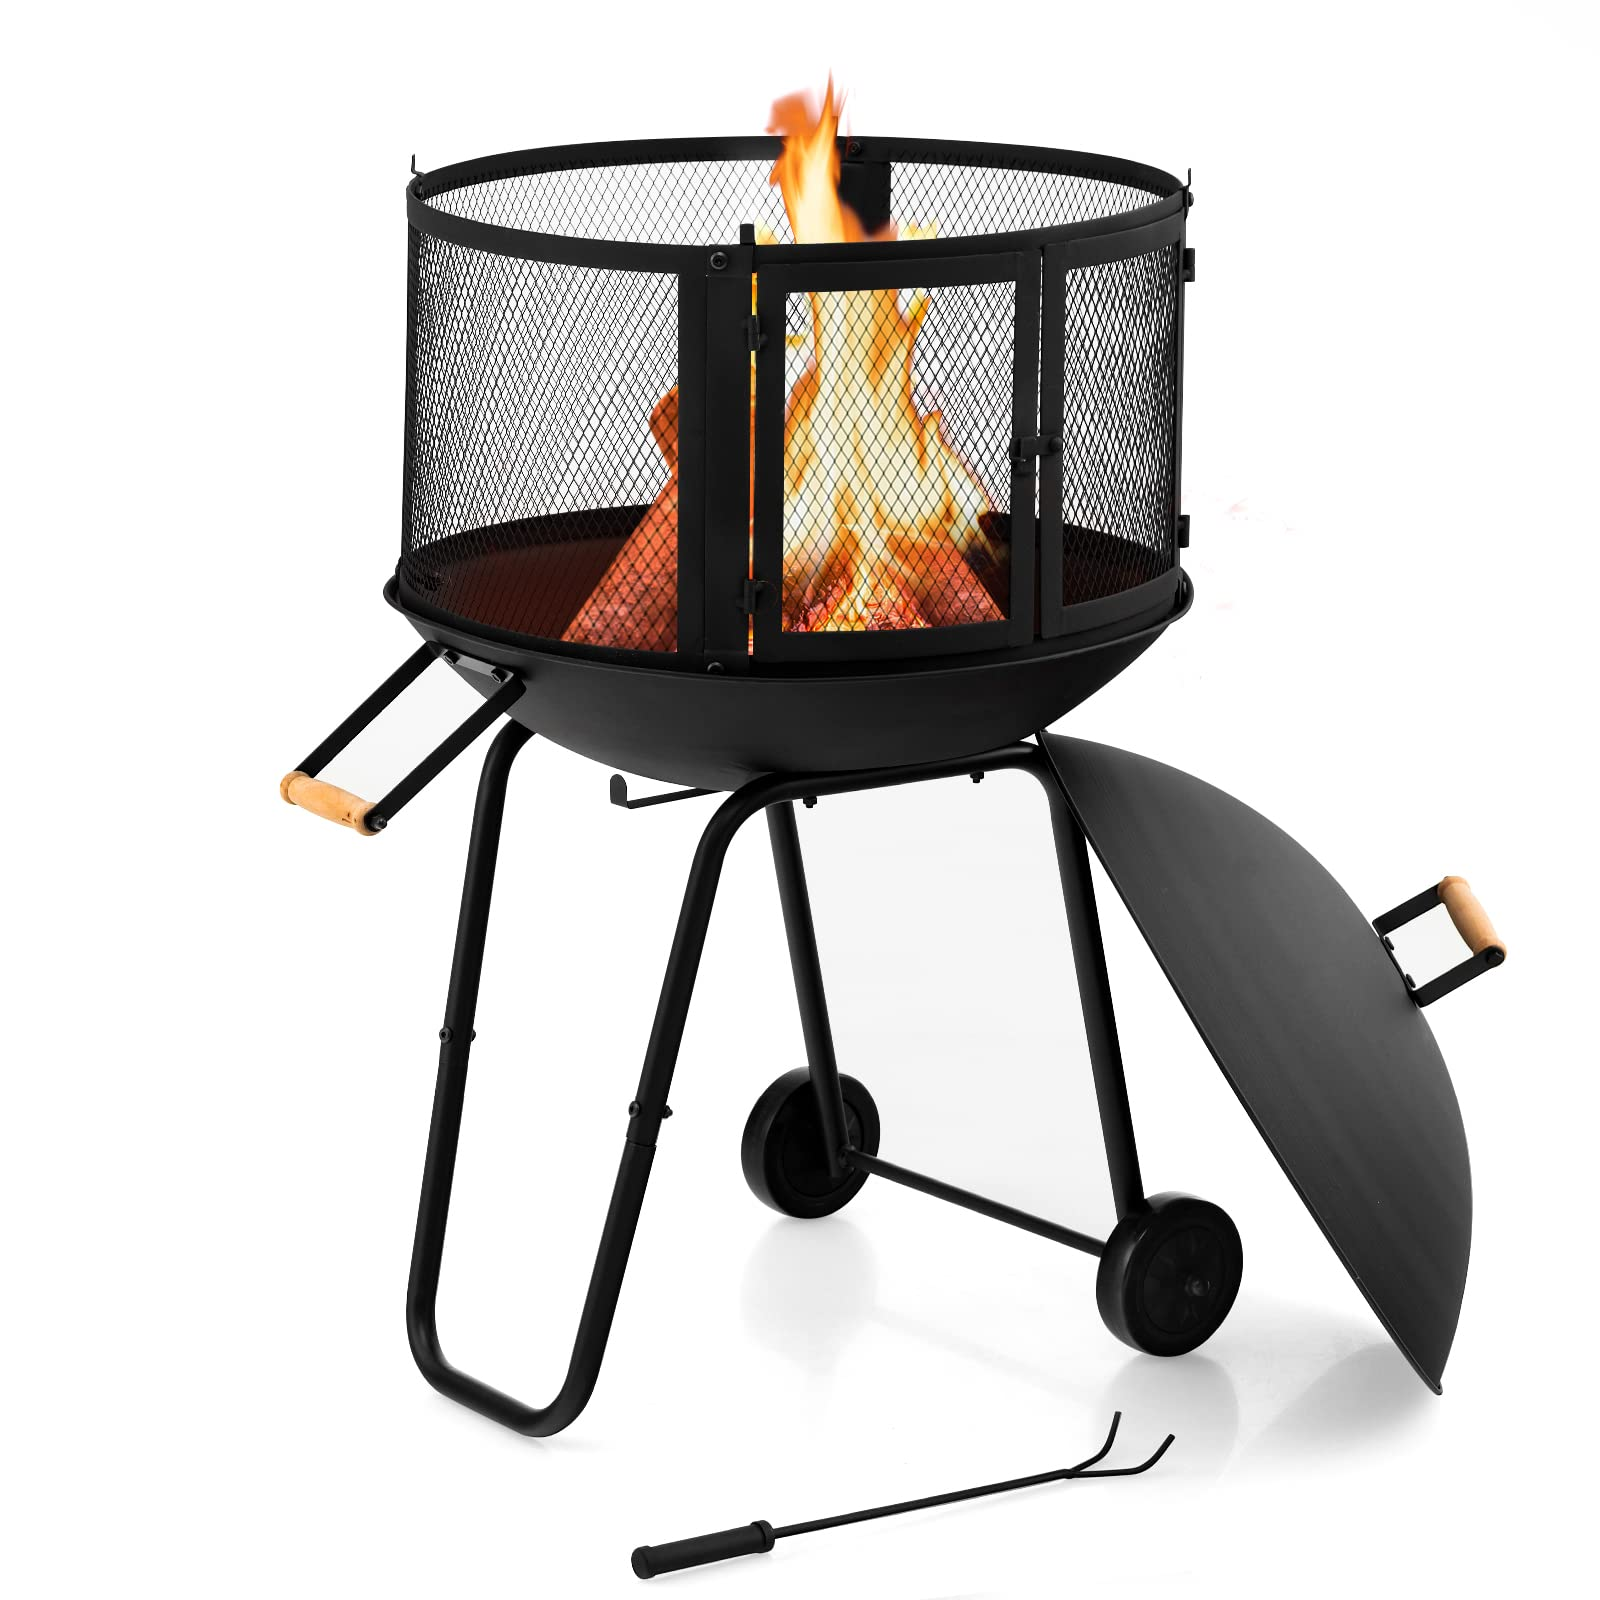 Giantex 28” Portable Fire Pit on Wheels - Mobile Wood Burning Firepit with Log Grate